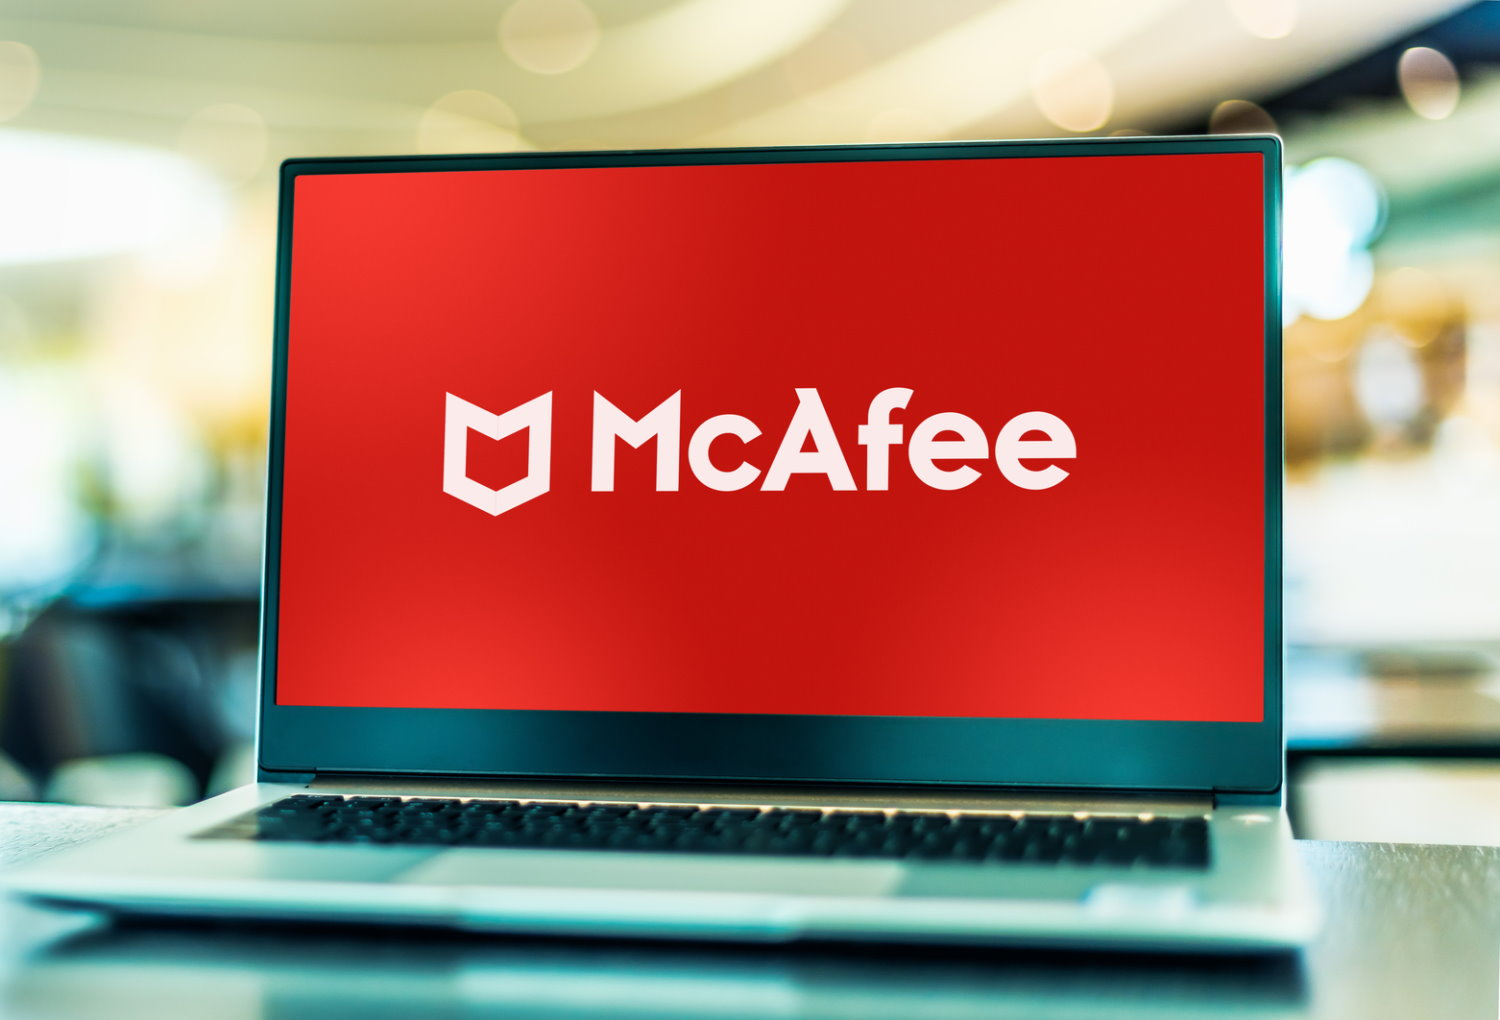 cach-go-mcafee-security-scan-tren-may-tinh